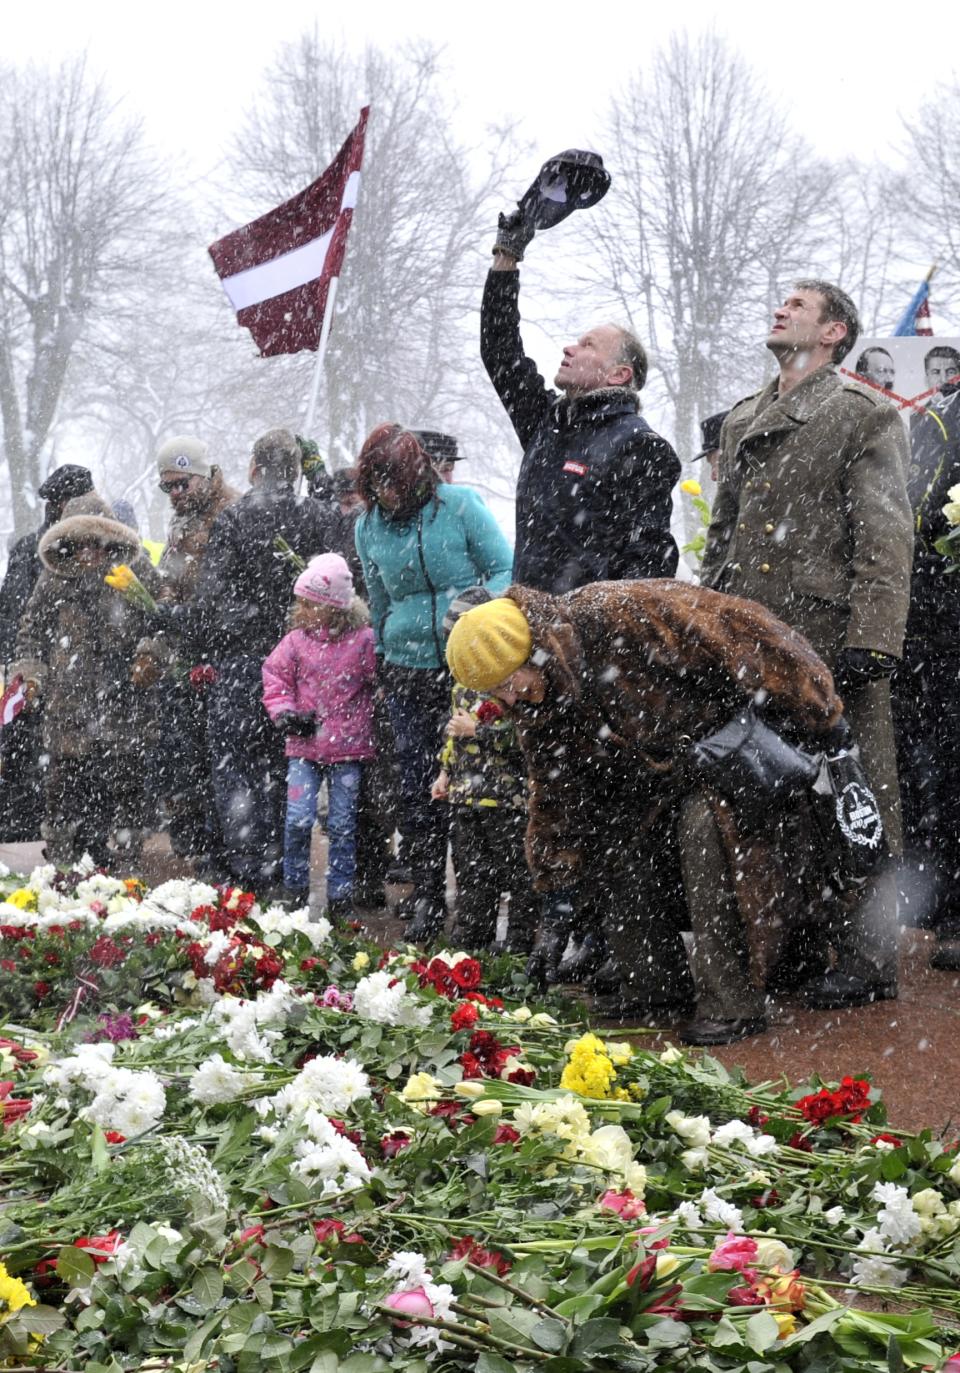 People put flowers at the Freedom Monument to commemorate World War II veterans who fought in Waffen SS divisions, in Riga, Latvia, Sunday, March 16, 2014. People participate in annual commemorations of Latvian soldiers who fought in Nazi units during WWII. (AP Photo/Roman Kosarov, F64 Photo Agency)